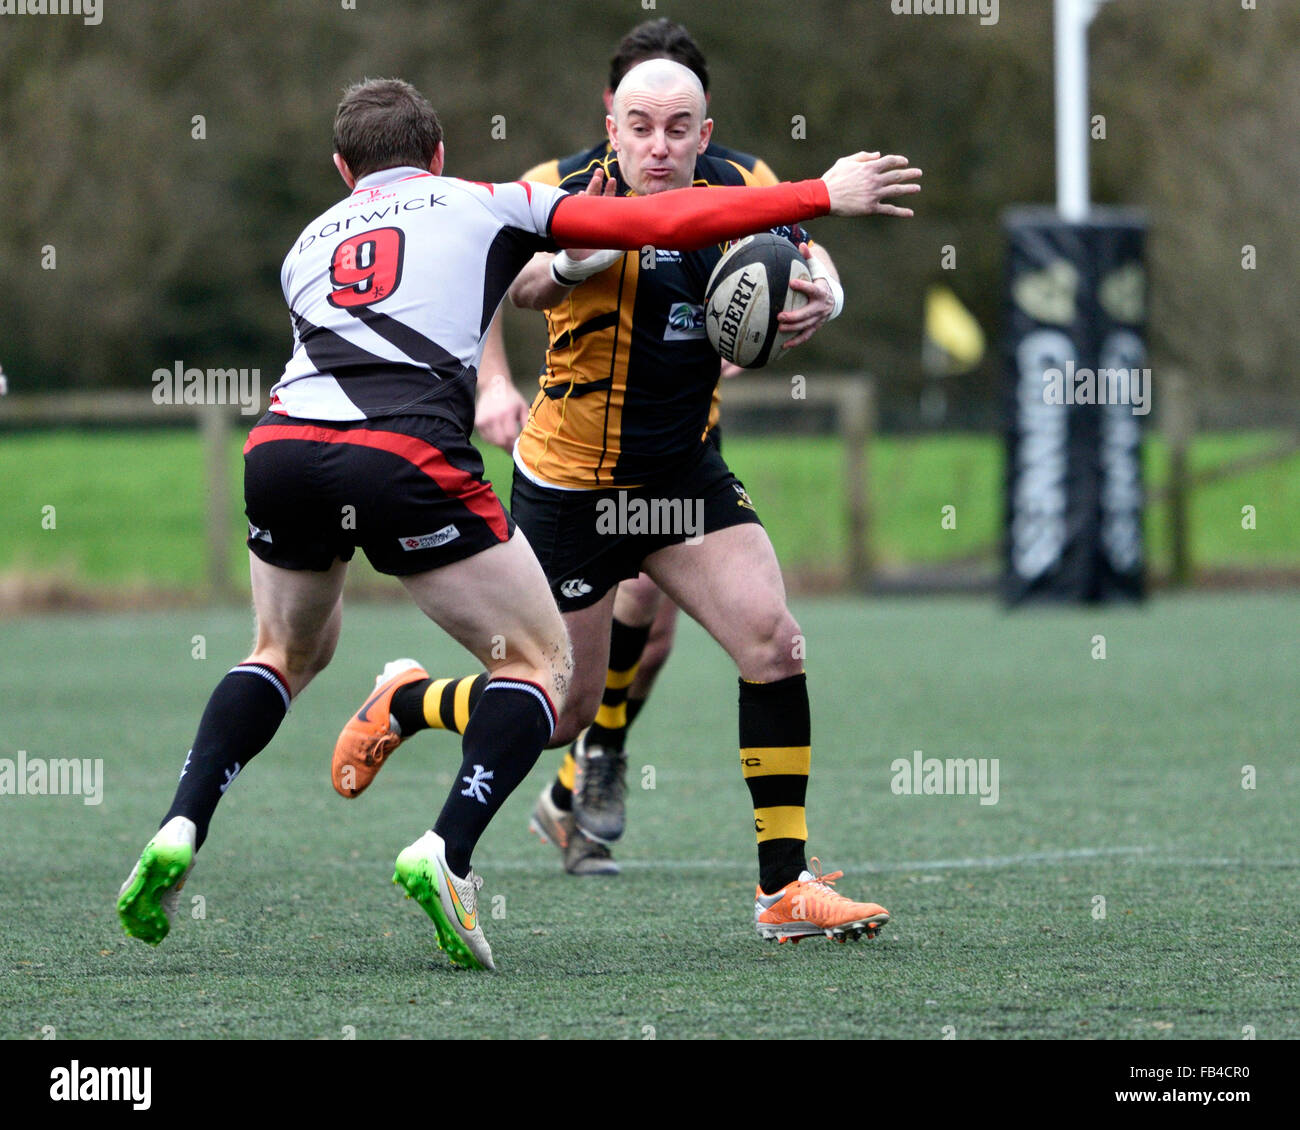 Burnage  9th January 2016 A Burnage player tries to break through in a match in which Burnage Rugby Club were attempting to move from bottom place in the league but were heavily defeated by Ilkley, who were third bottom. Credit:  John Fryer/Alamy Live News Stock Photo